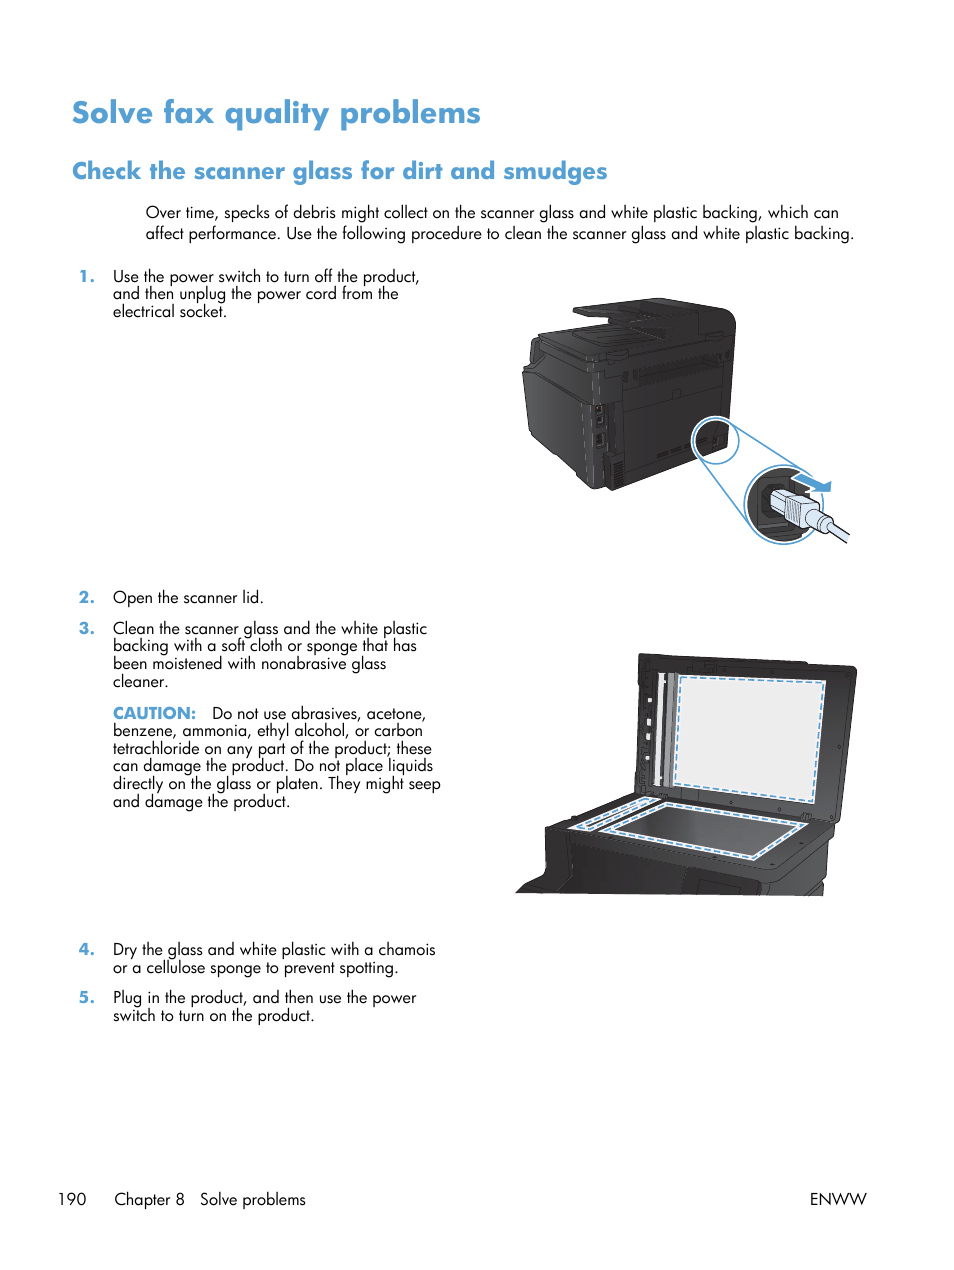 Solve fax quality problems, Check the scanner glass for dirt and